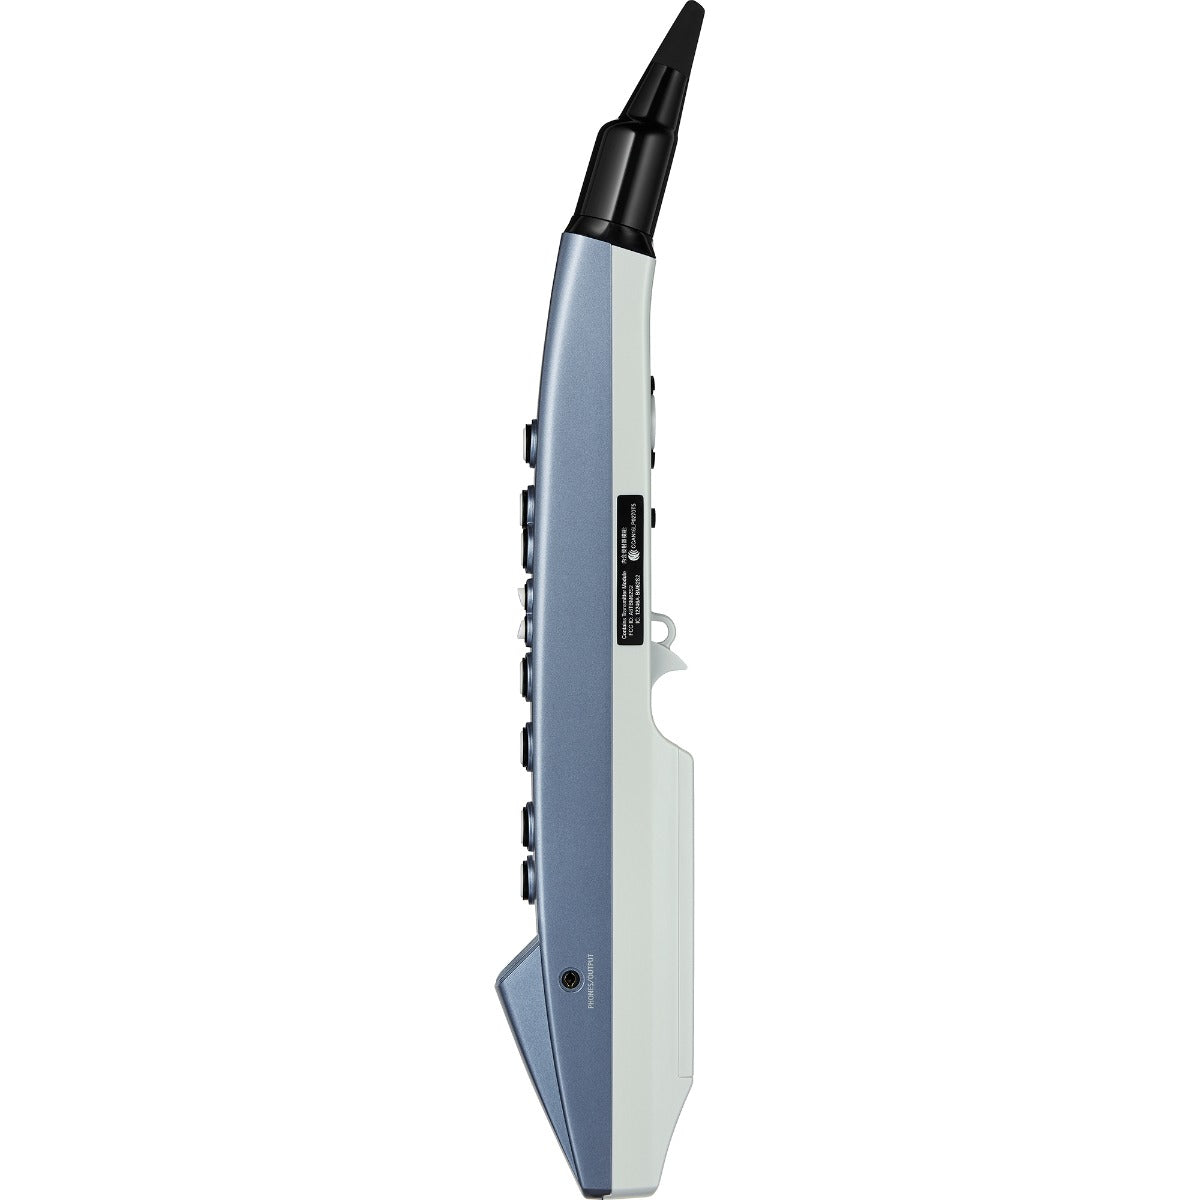 Right side view of the Roland AE-01 Aerophone Mini